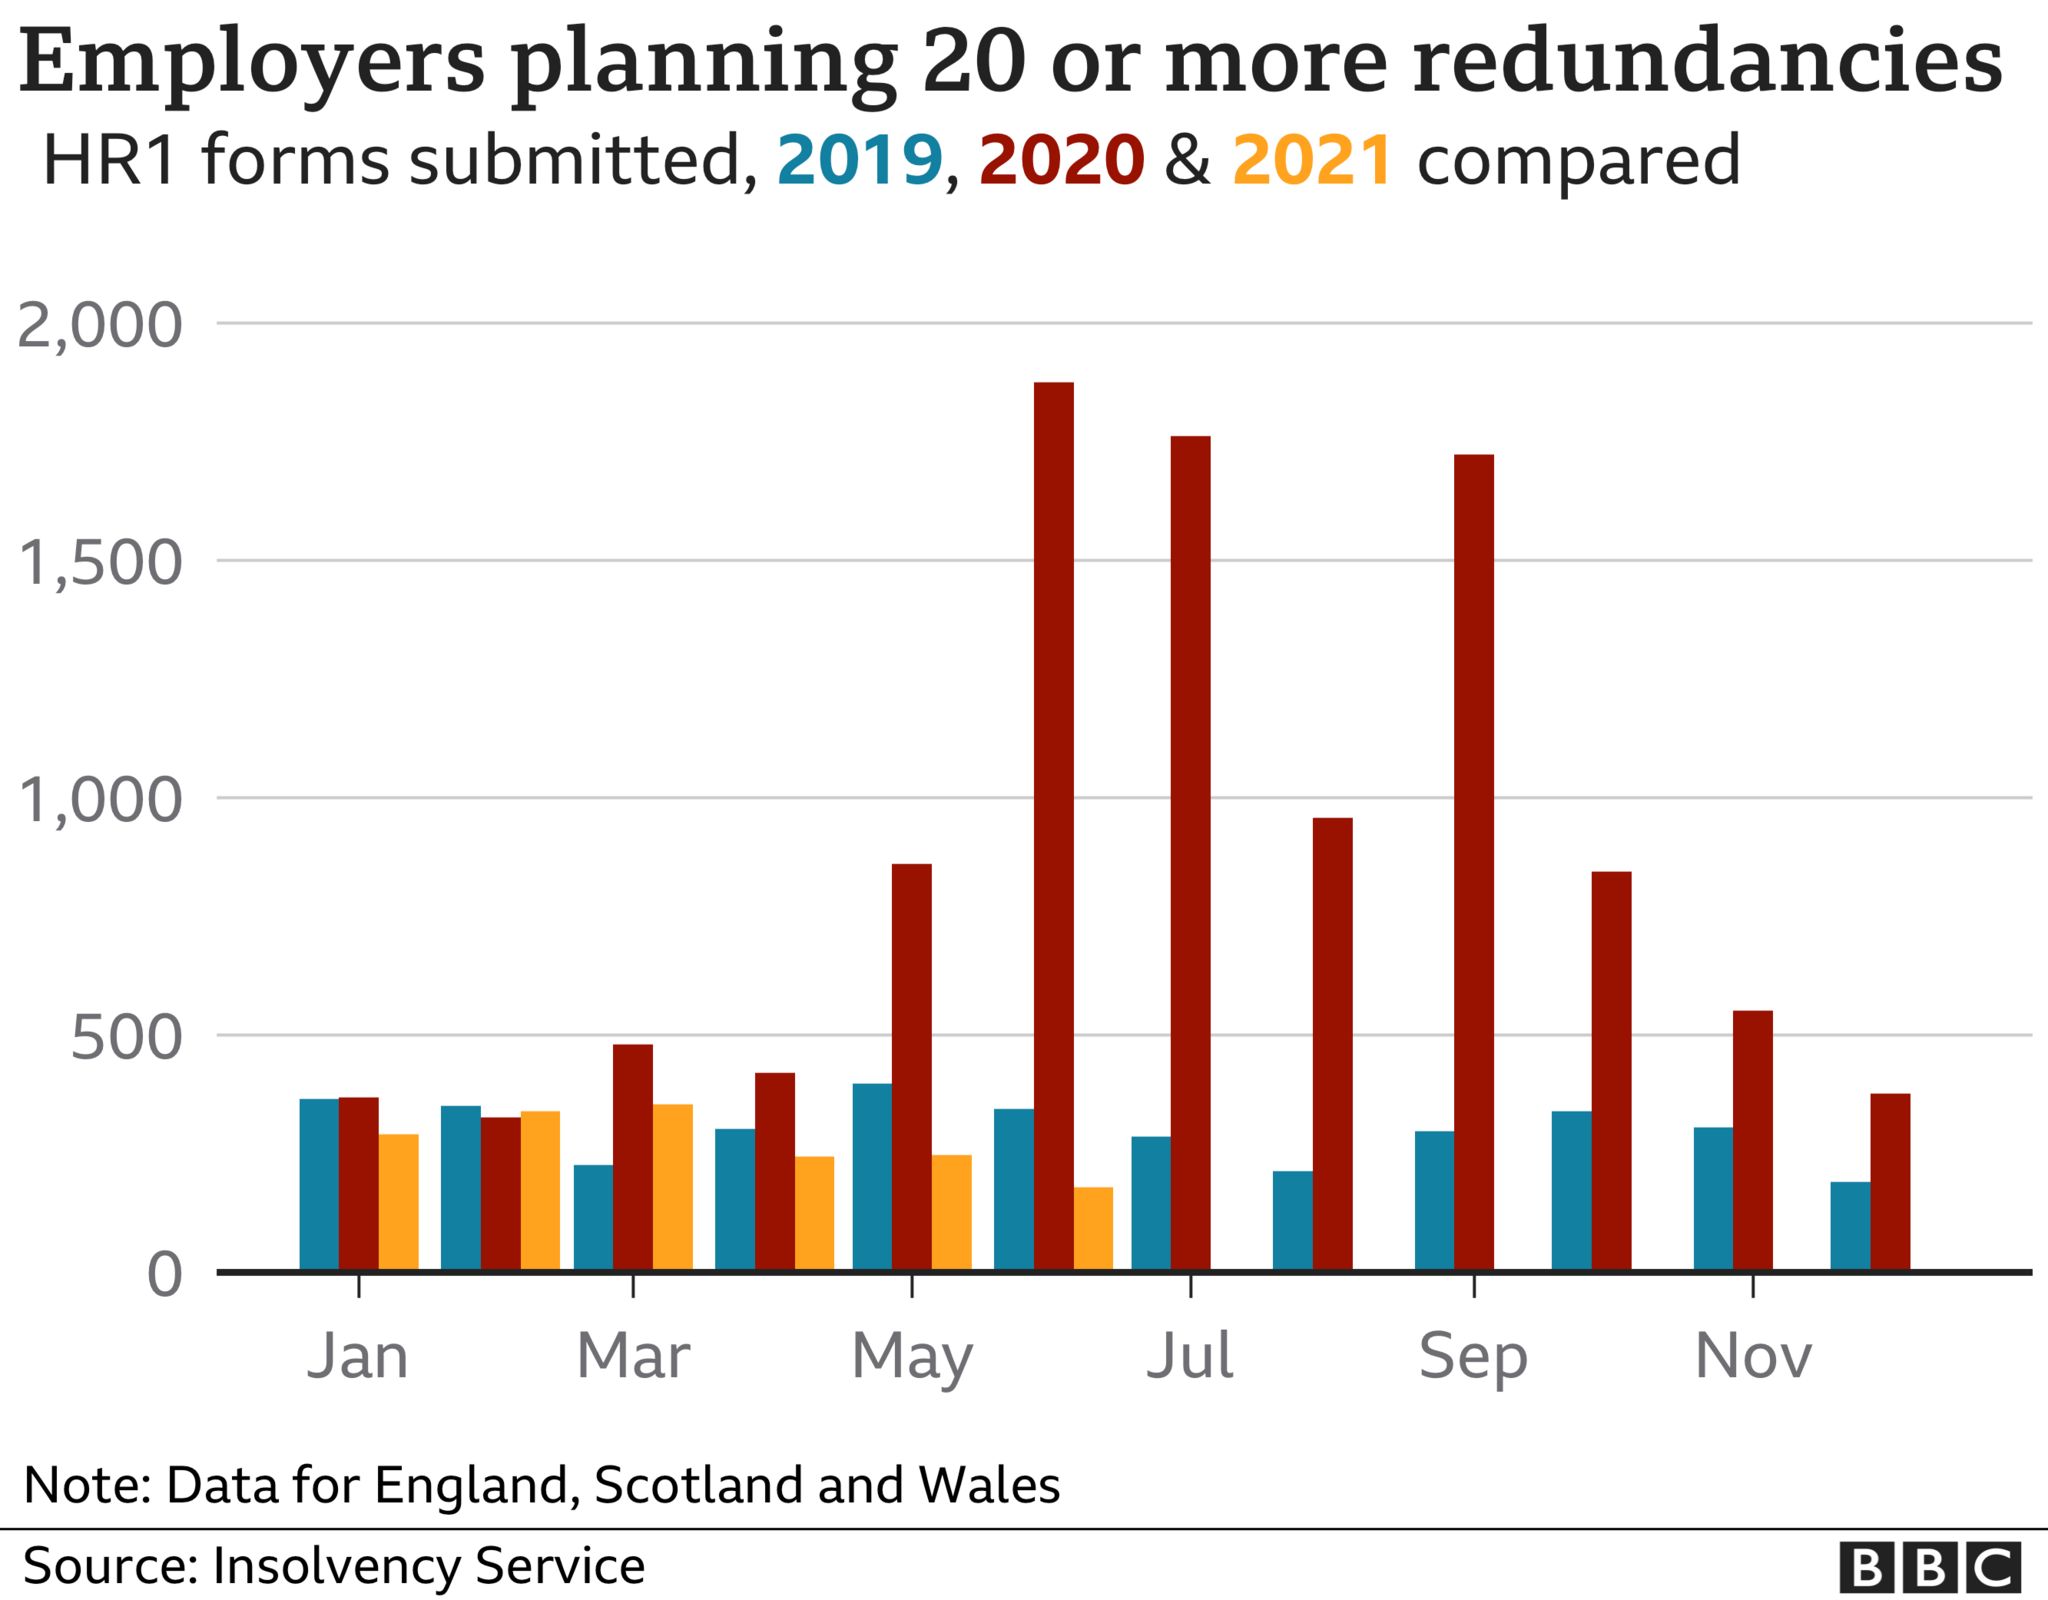 Graph of number of employers planning 20 or more redundancies for 2019, 2020 and 2021